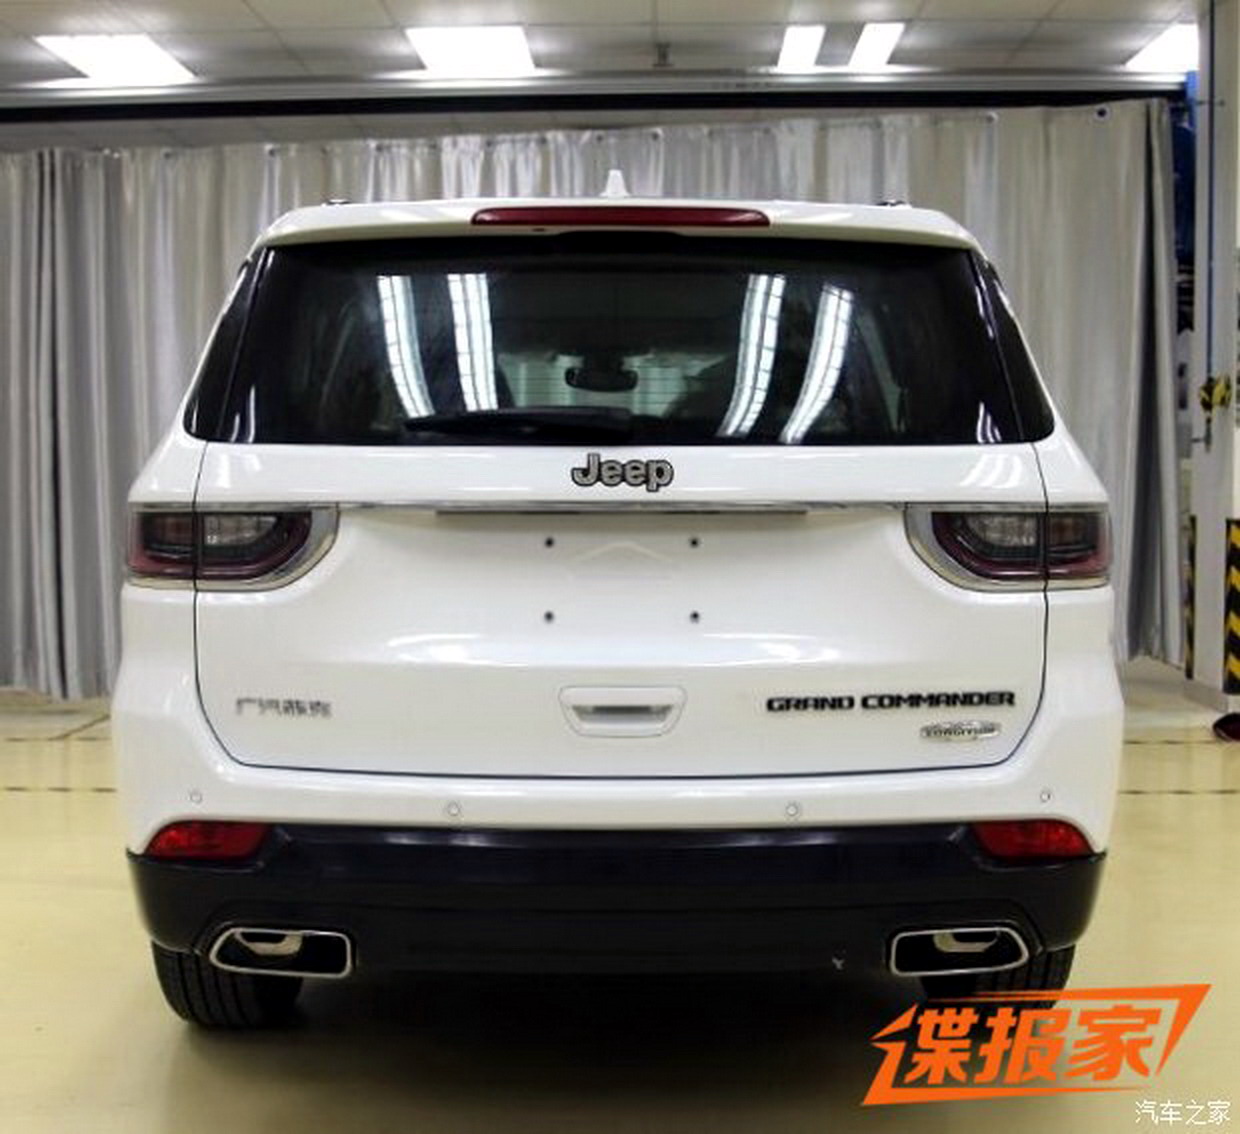 New 2018 Jeep Grand Commander 7 Seater Leaks Ahead Of China